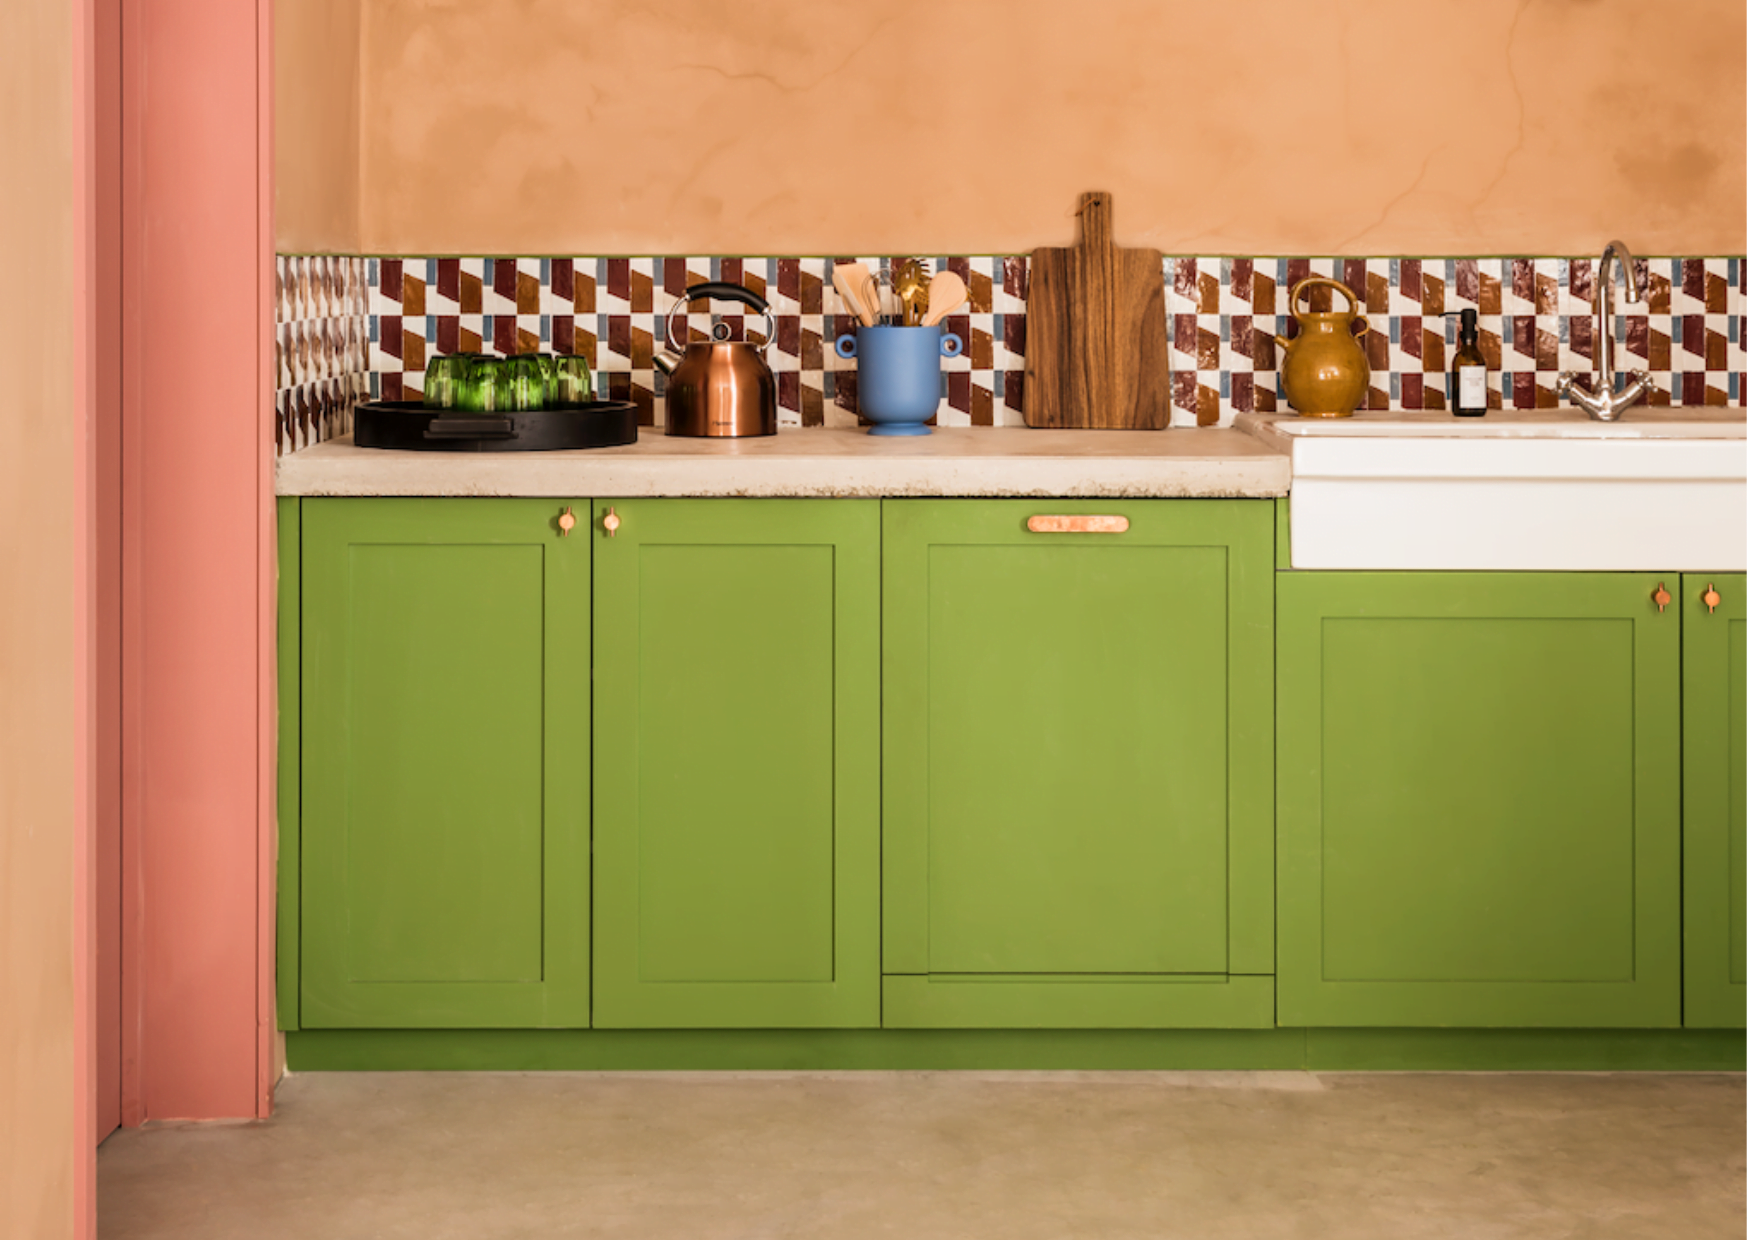 The kitchen of the holiday house at the Manufacture Royale de Lectoure: green furniture, orange wall